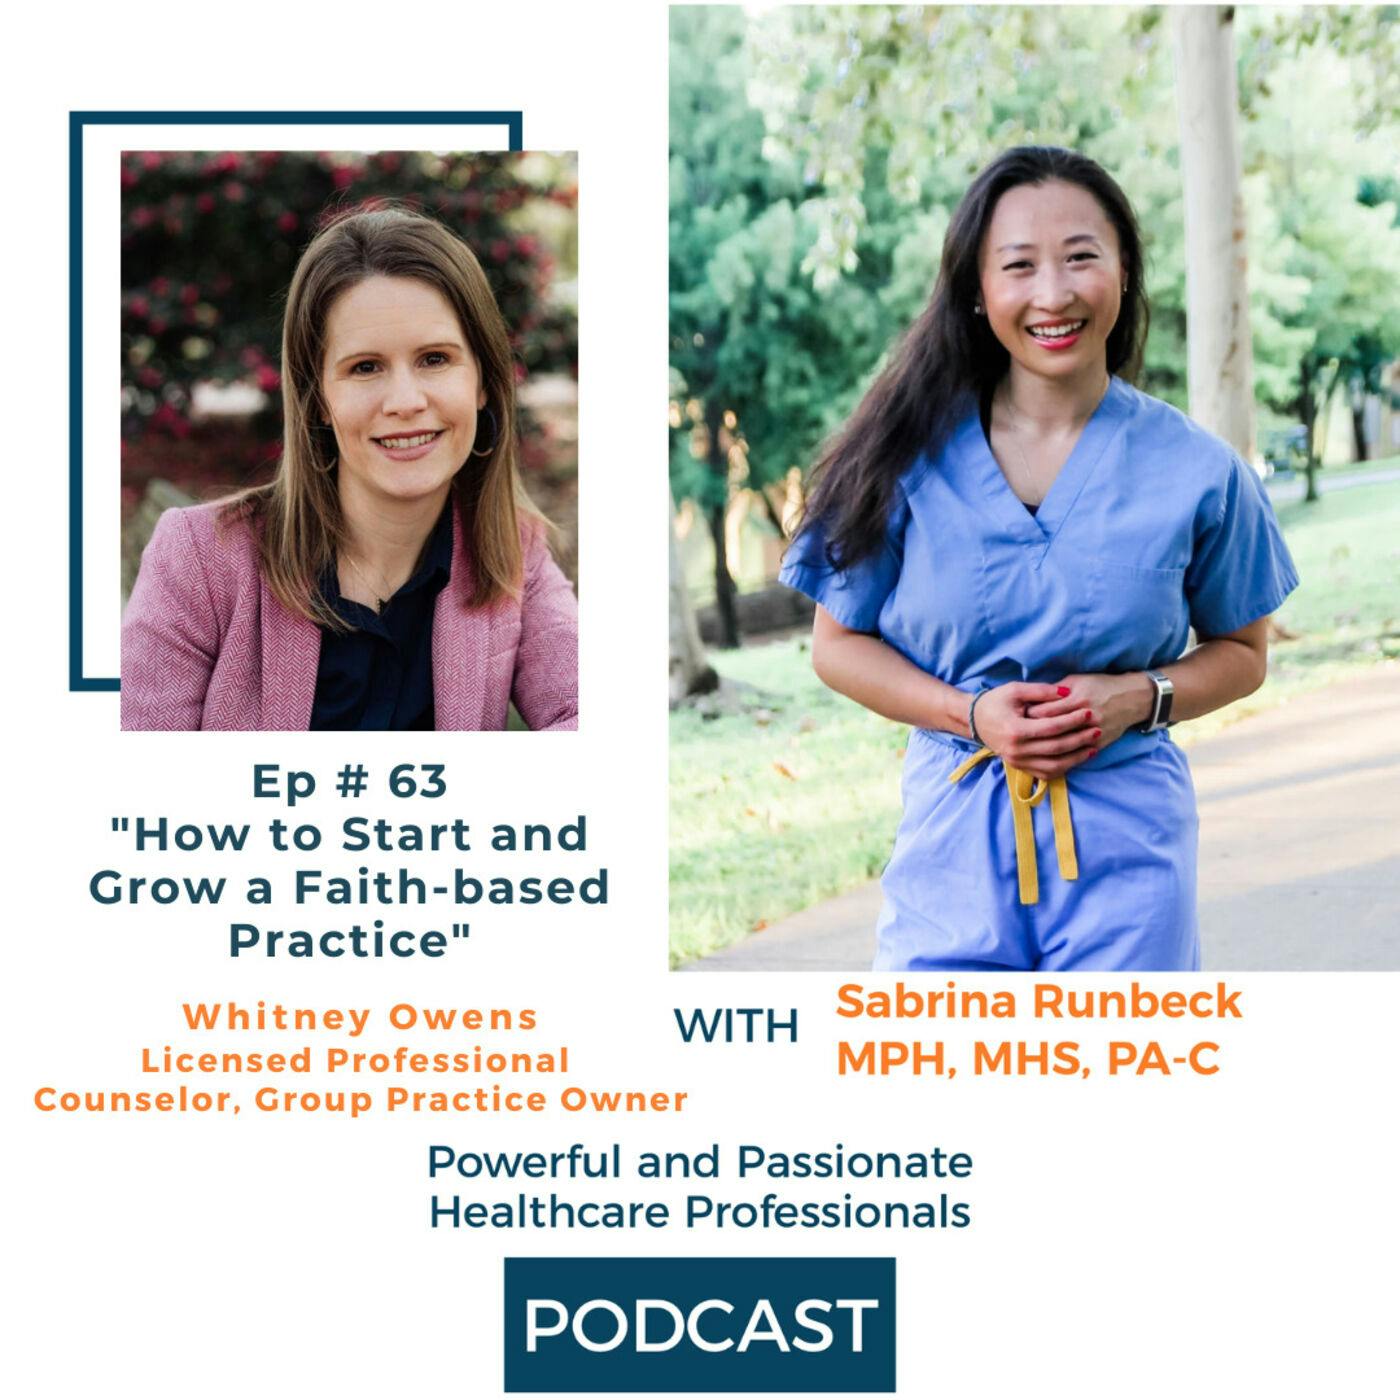 Ep 63 – How to Start and Grow a Faith-based Practice with Whitney Owens